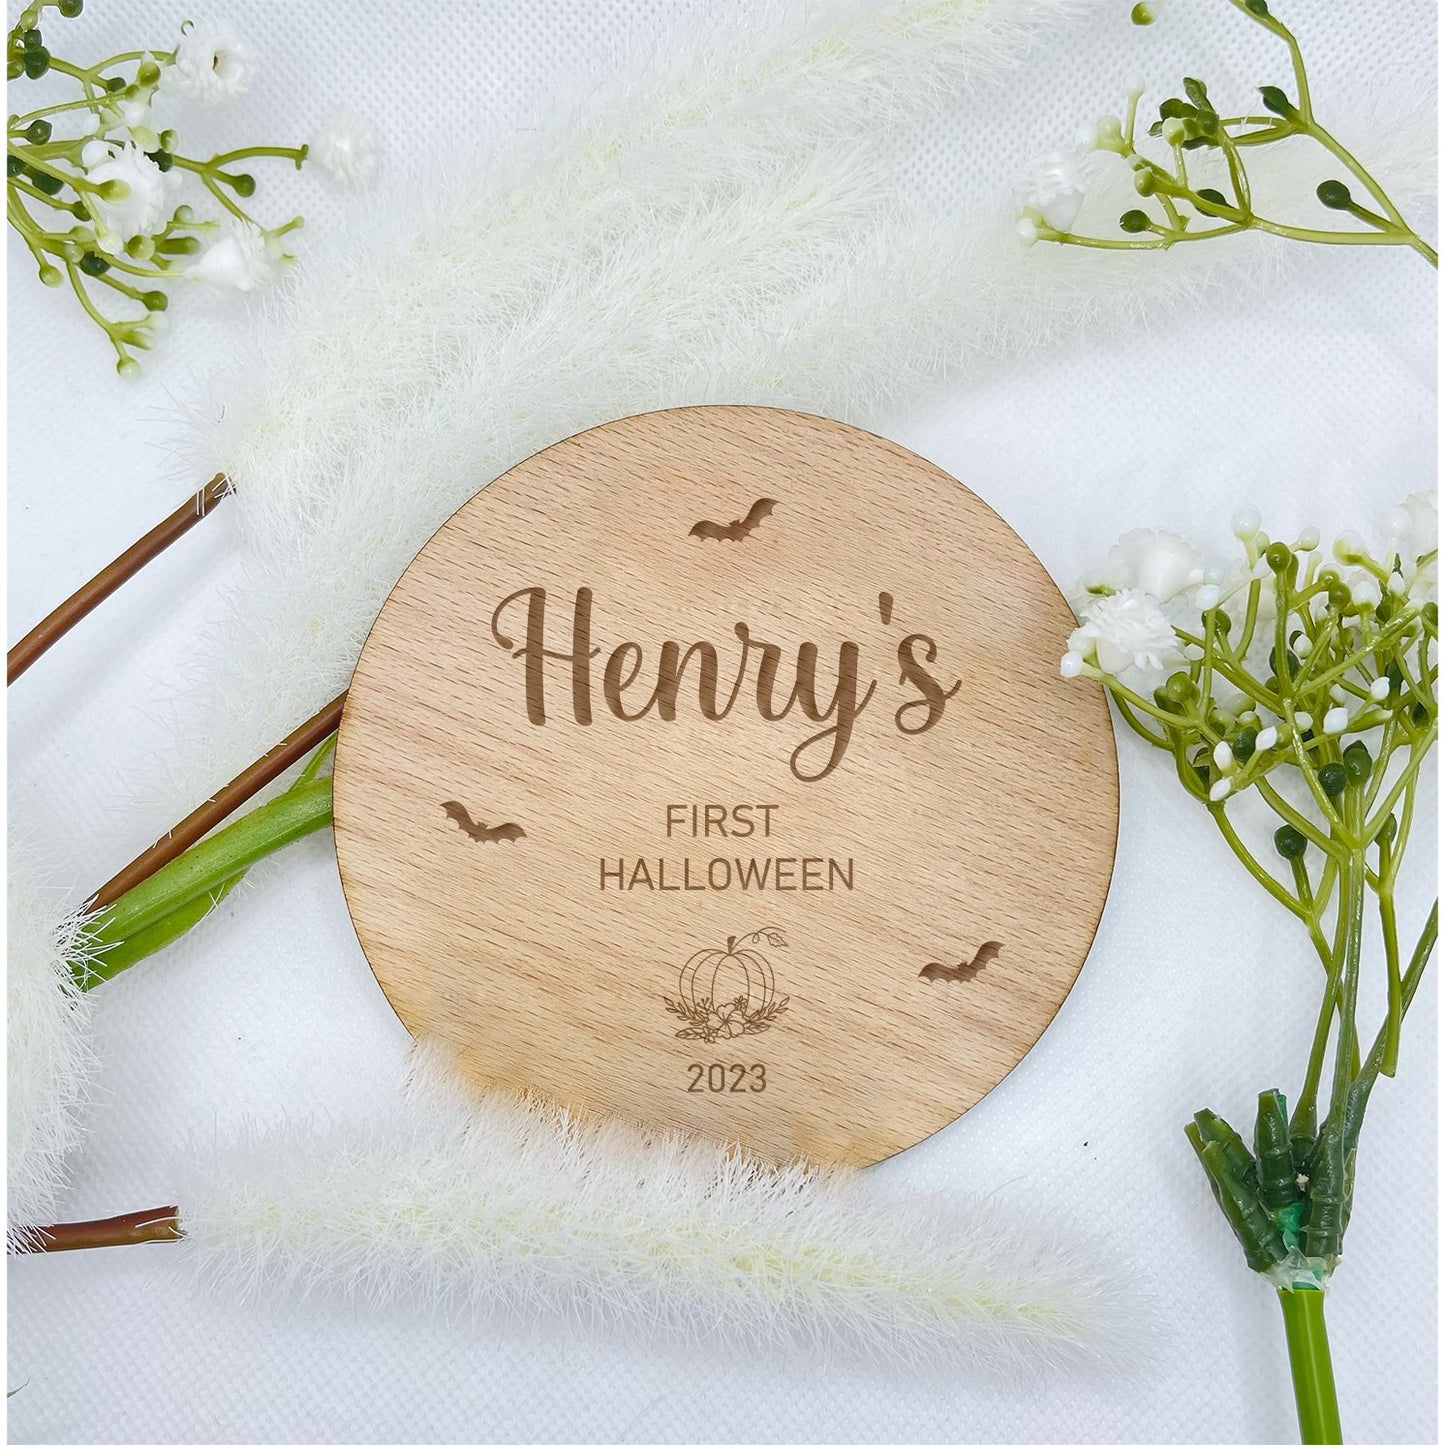 Baby's First Halloween Keepsake: Commemorate your little one's first Halloween with our personalised cherry wood plaque. Engraved with cute bats & pumpkin and customized with your baby's name, this cherished keepsake holds a special memory. Choose from 10x10cm or 15x15cm (approx.) size, crafted from 4mm thick cherry veneer. Capture the enchantment of this milestone occasion. Please be mindful that this item is not intended for use by children, and adult supervision is required.